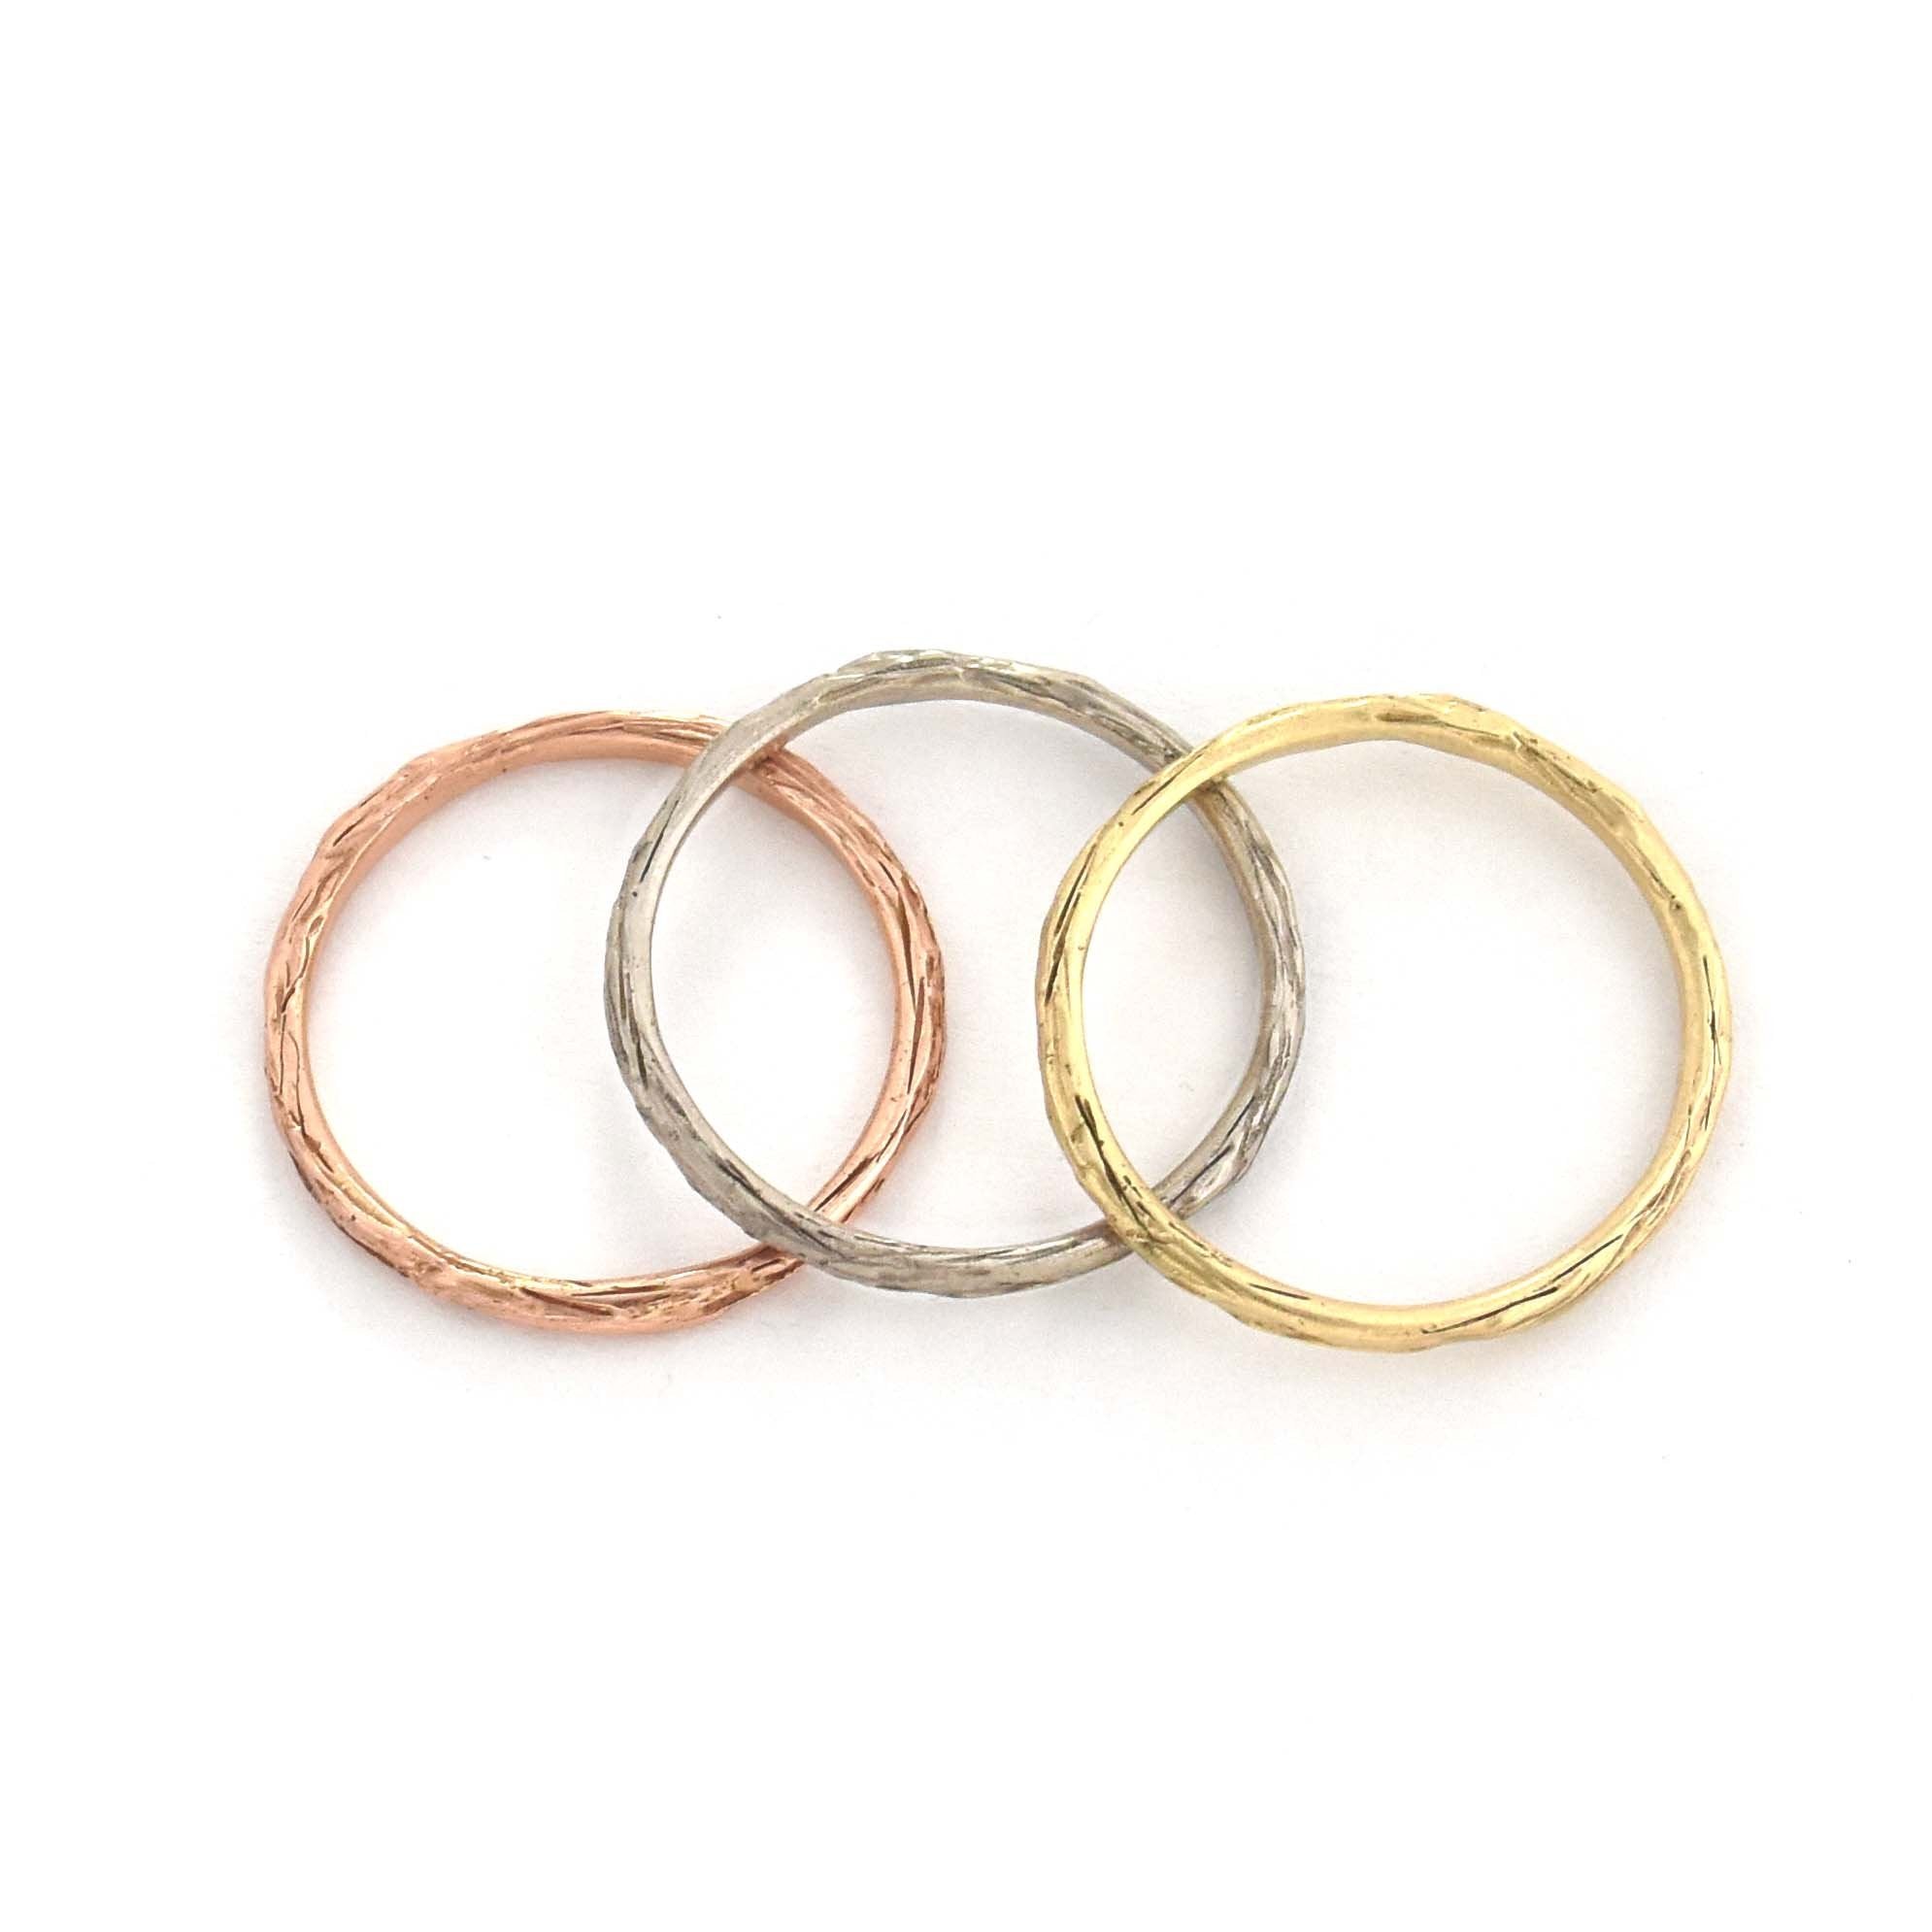 Narrow Gold Twig Ring - your choice of gold - Wedding Ring 14K Rose Gold 14K Yellow Gold 3168 - handmade by Beth Millner Jewelry